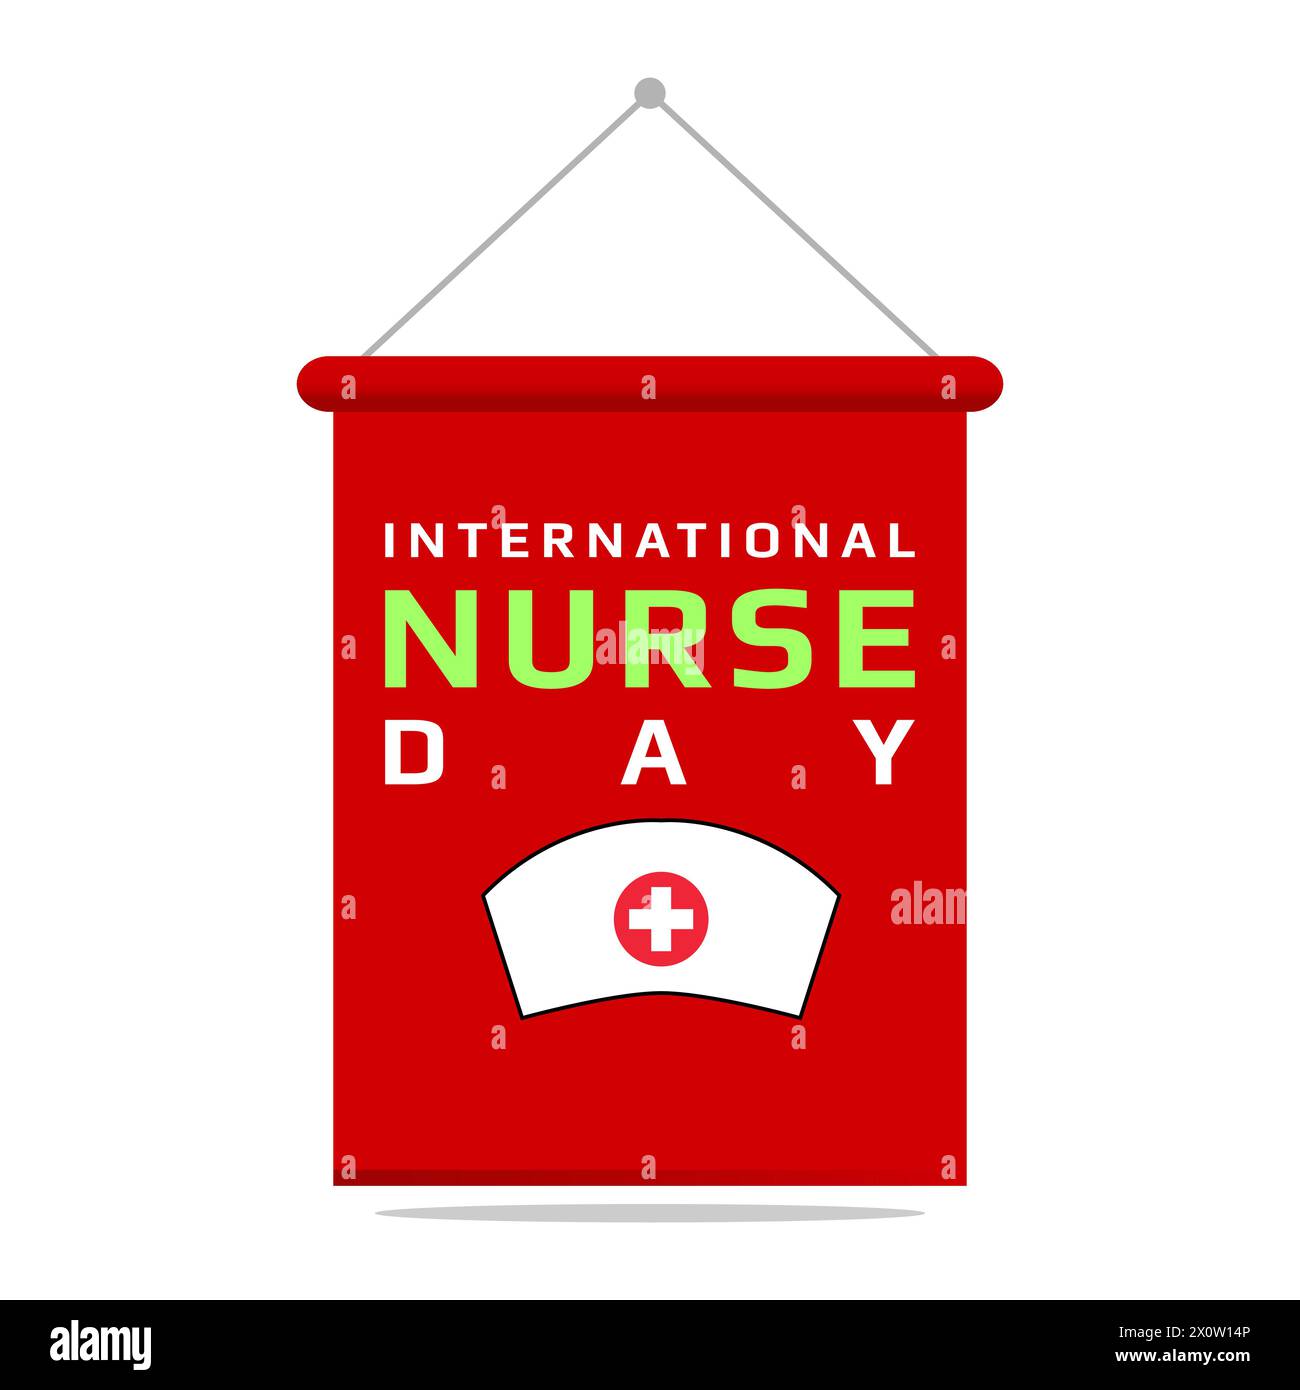 Nurse day vector illustration hanging banner or poster design with typography text international nurse day Stock Vector